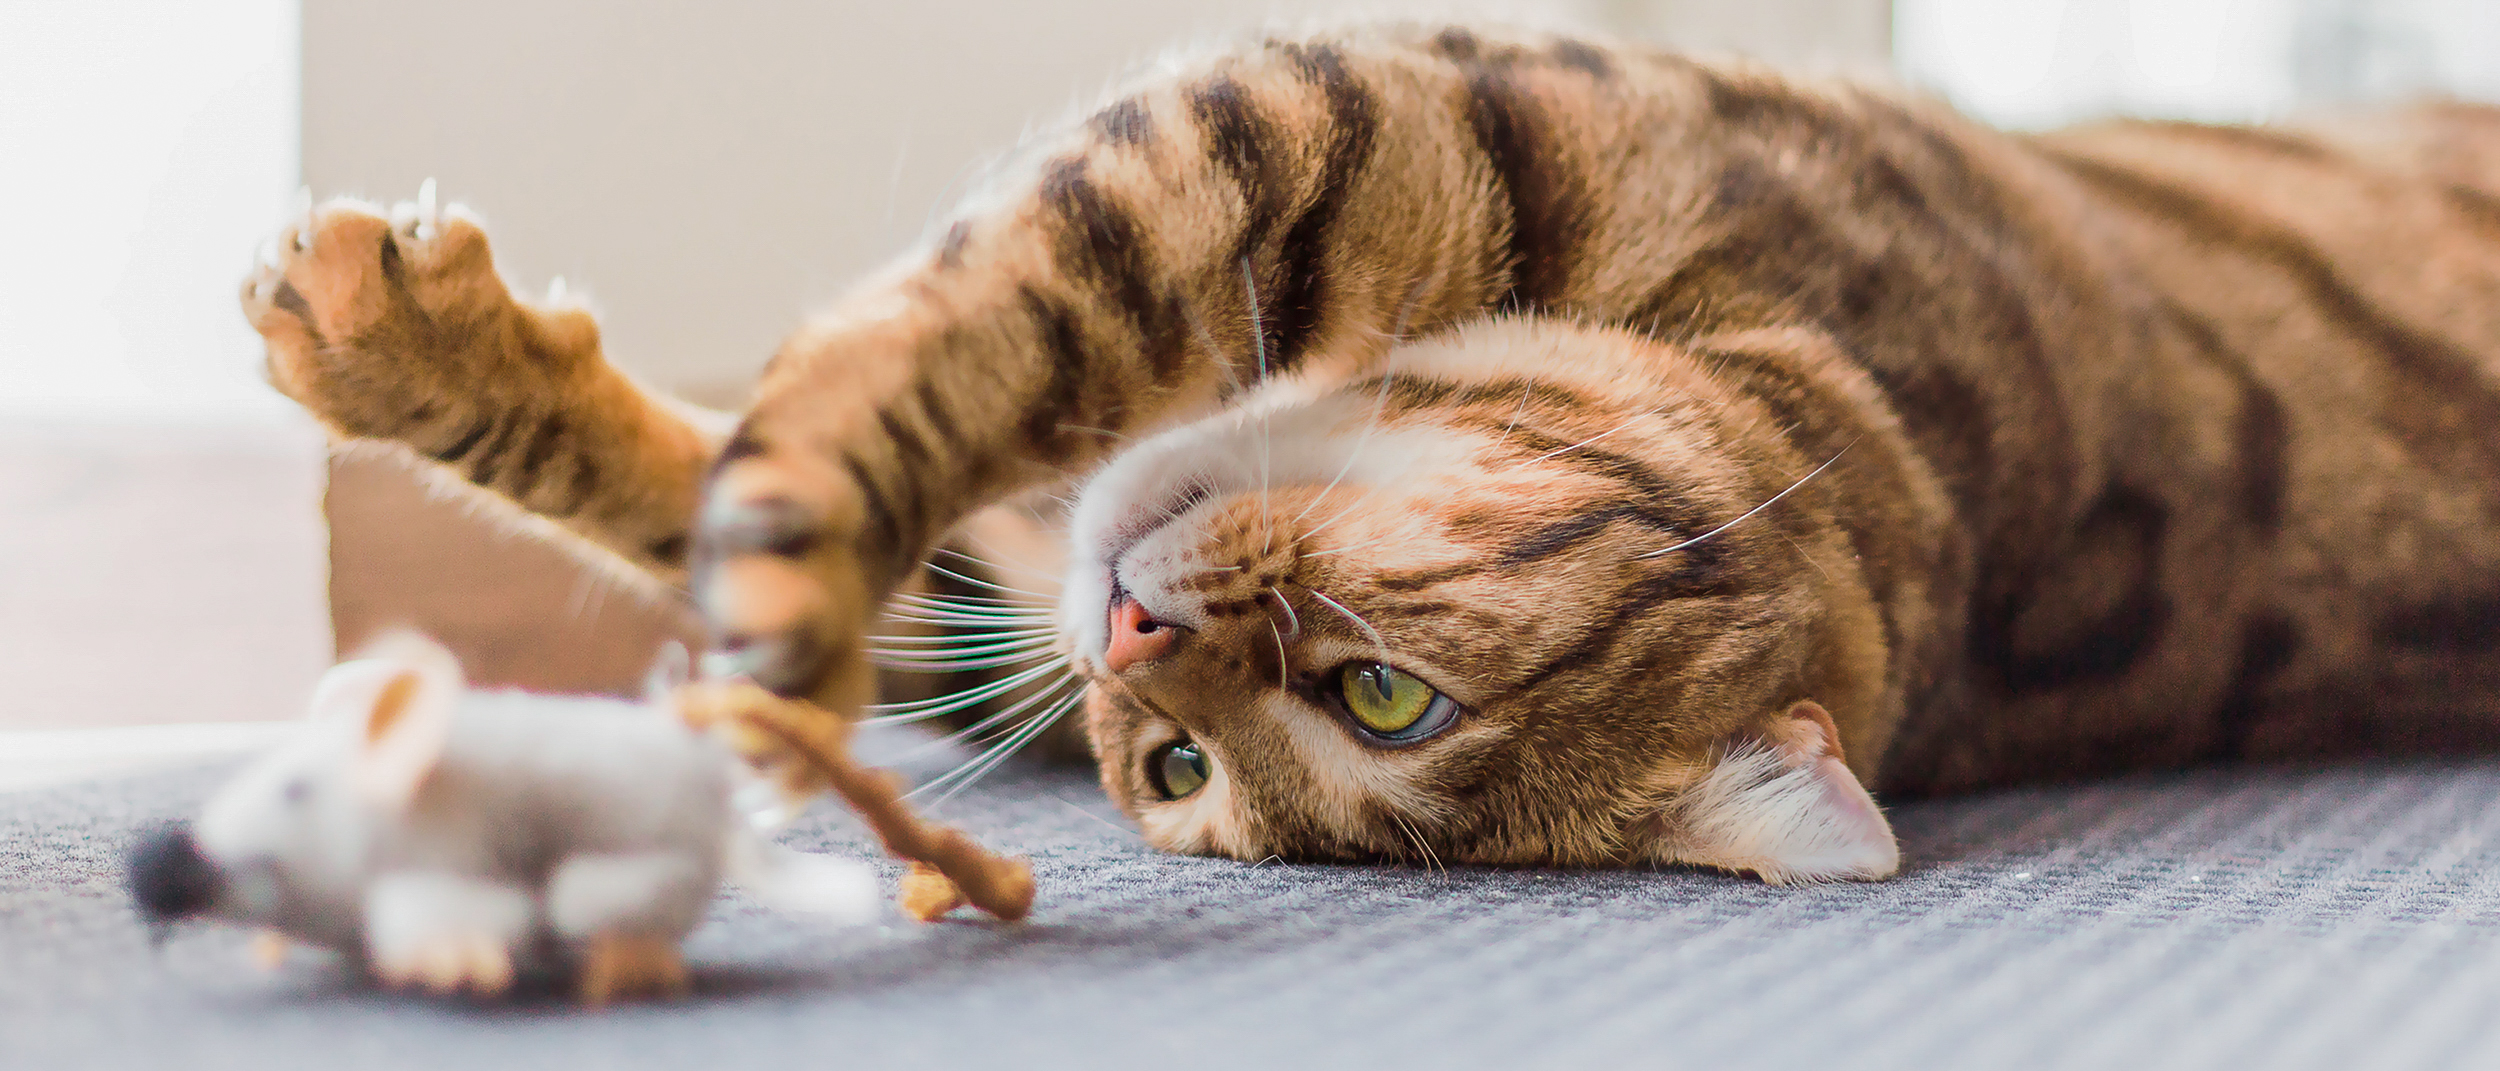 Adult Bengal lying on its back playing with a cat toy on a carpet.